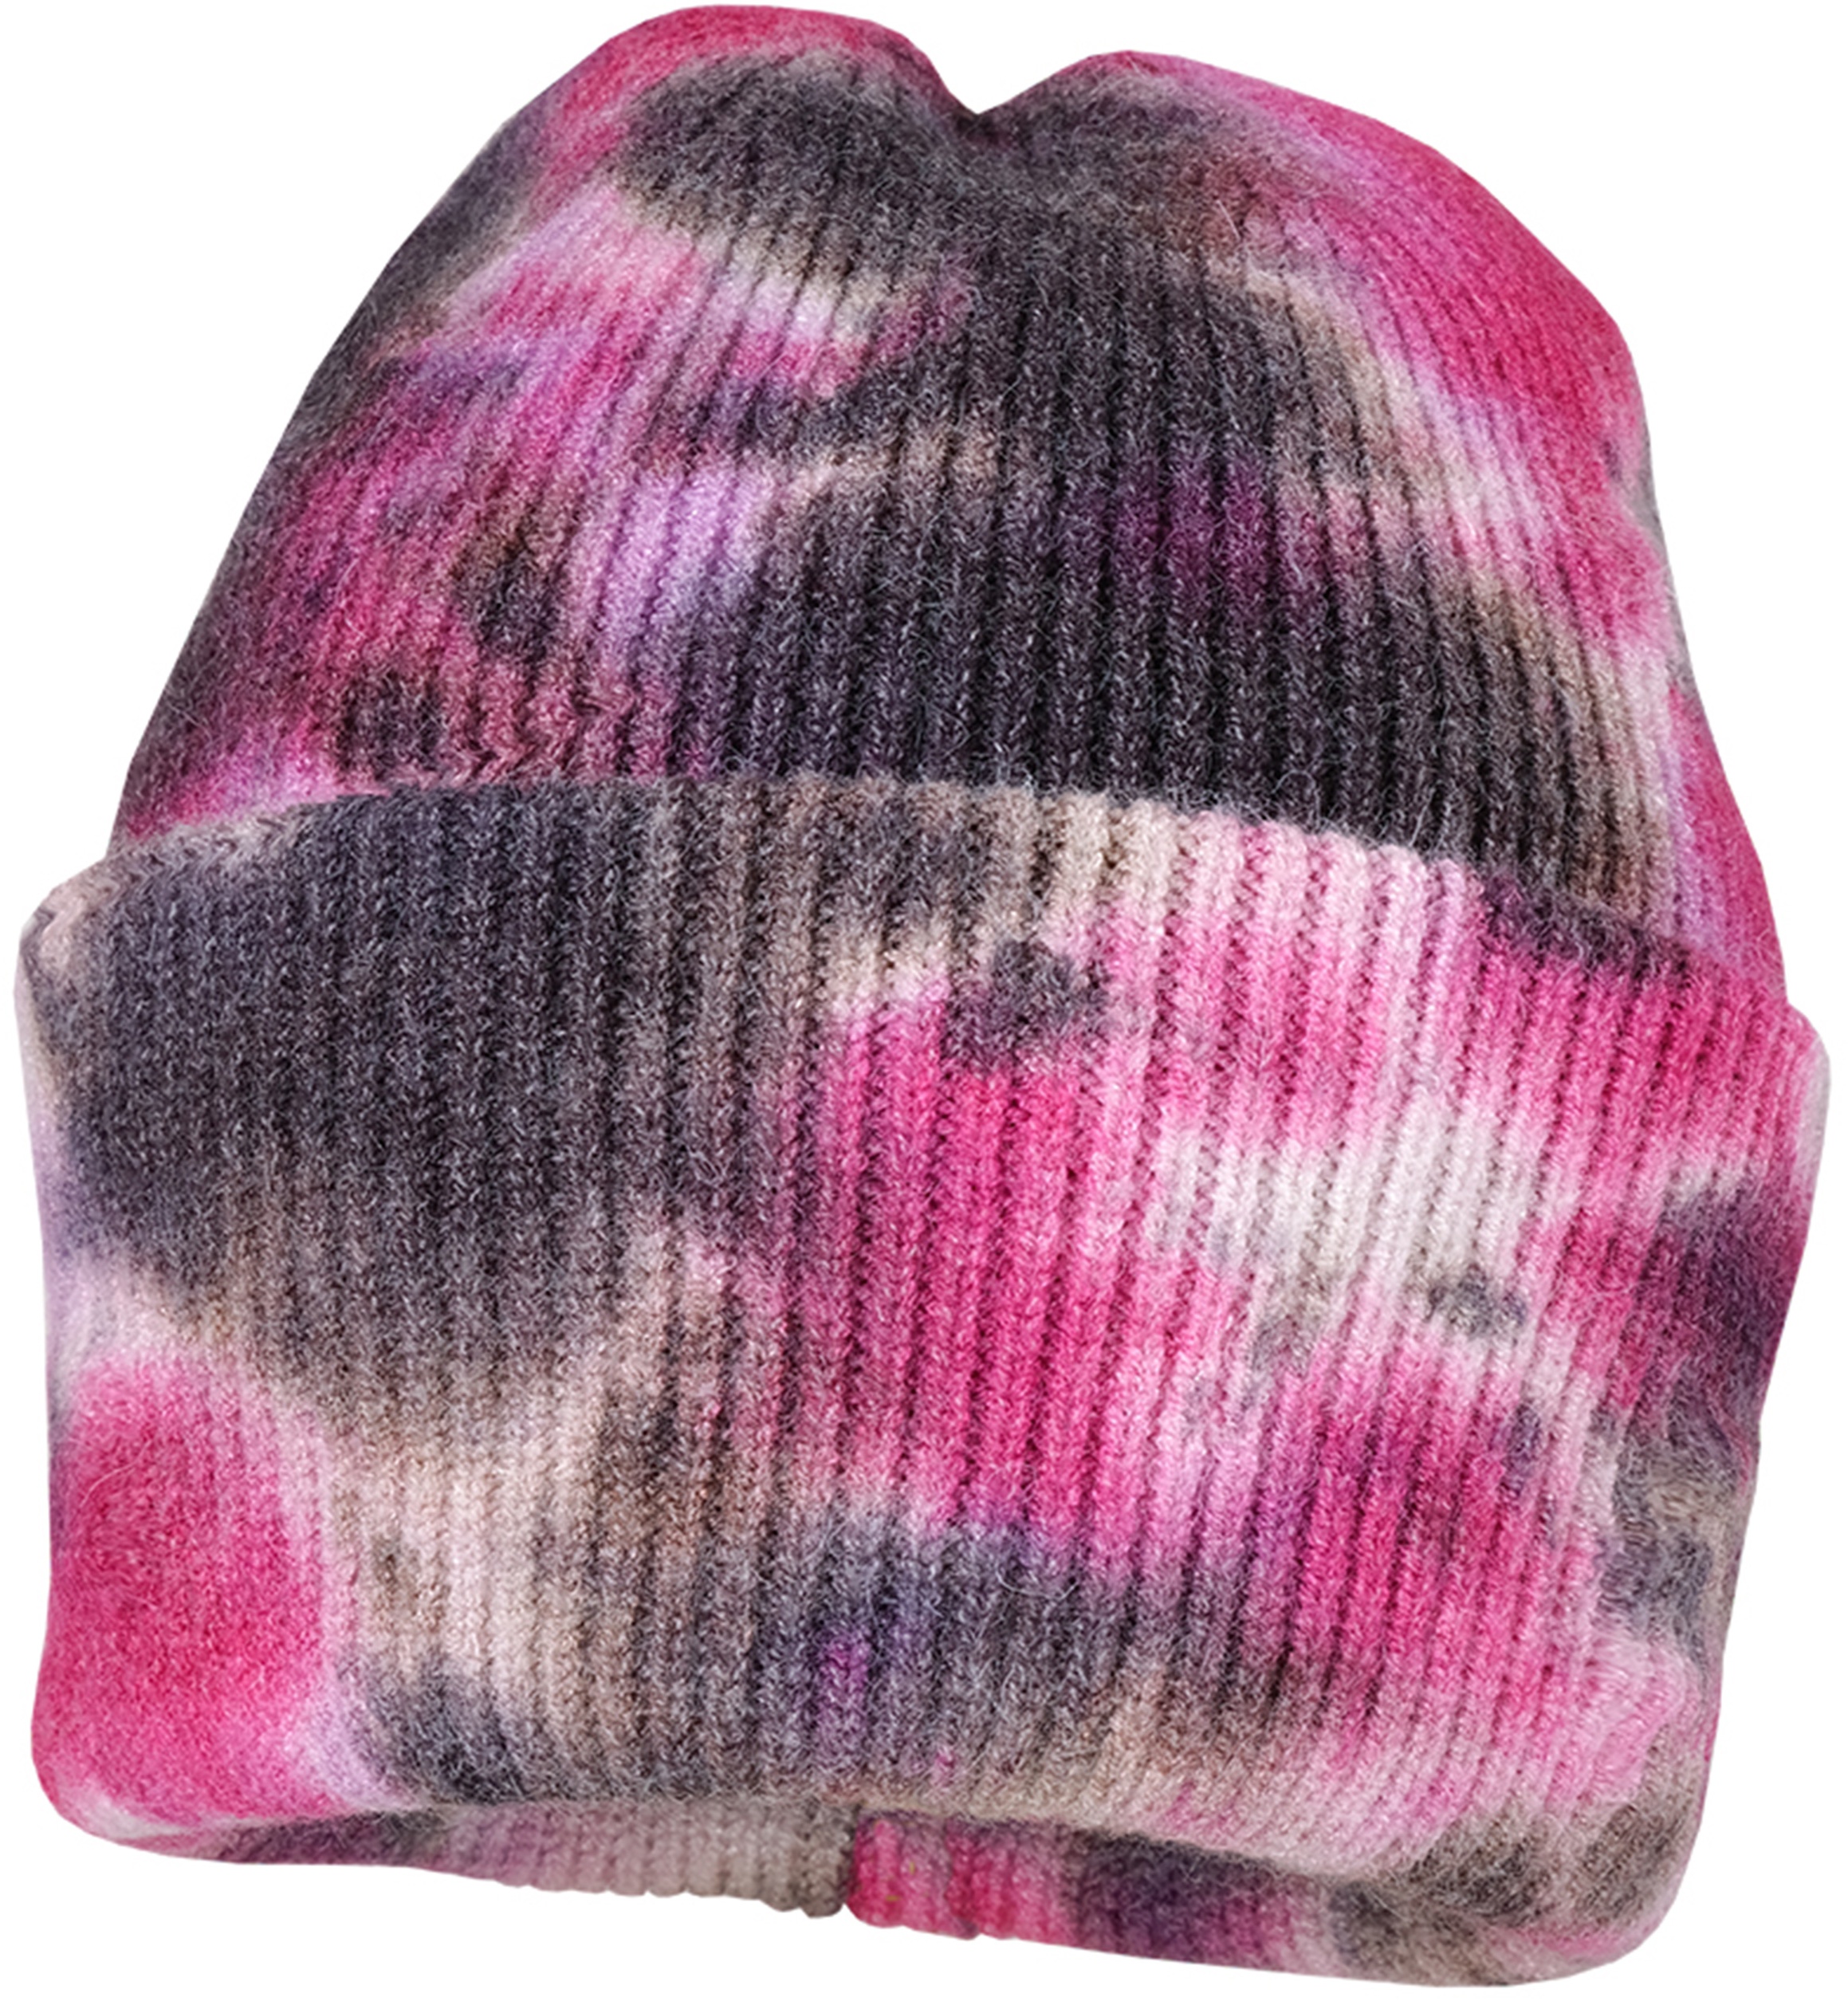 maximo - Strick-Beanie BATIC in dunkelpink, Gr.51